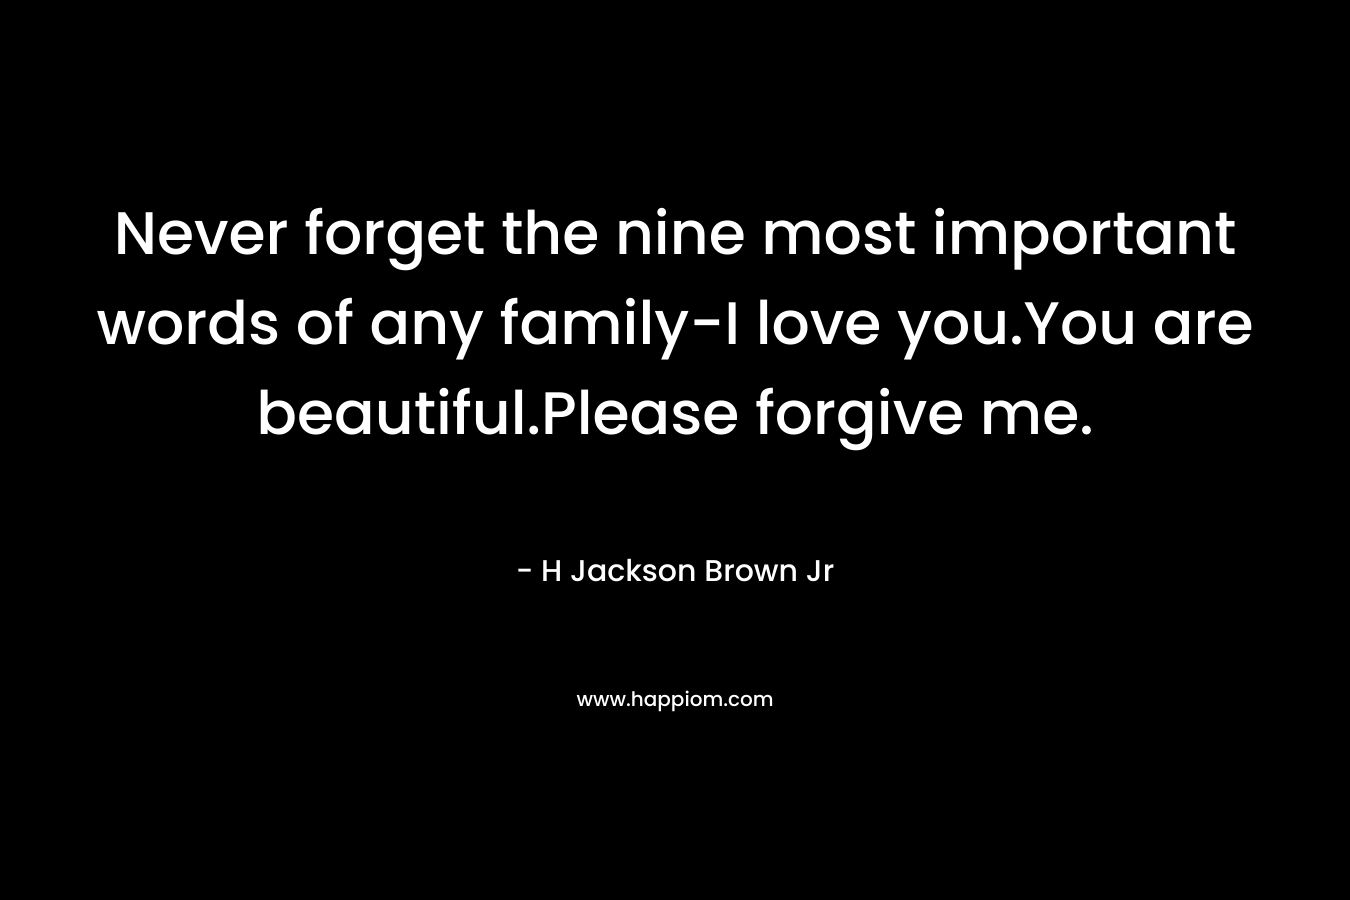 Never forget the nine most important words of any family-I love you.You are beautiful.Please forgive me. – H Jackson Brown Jr